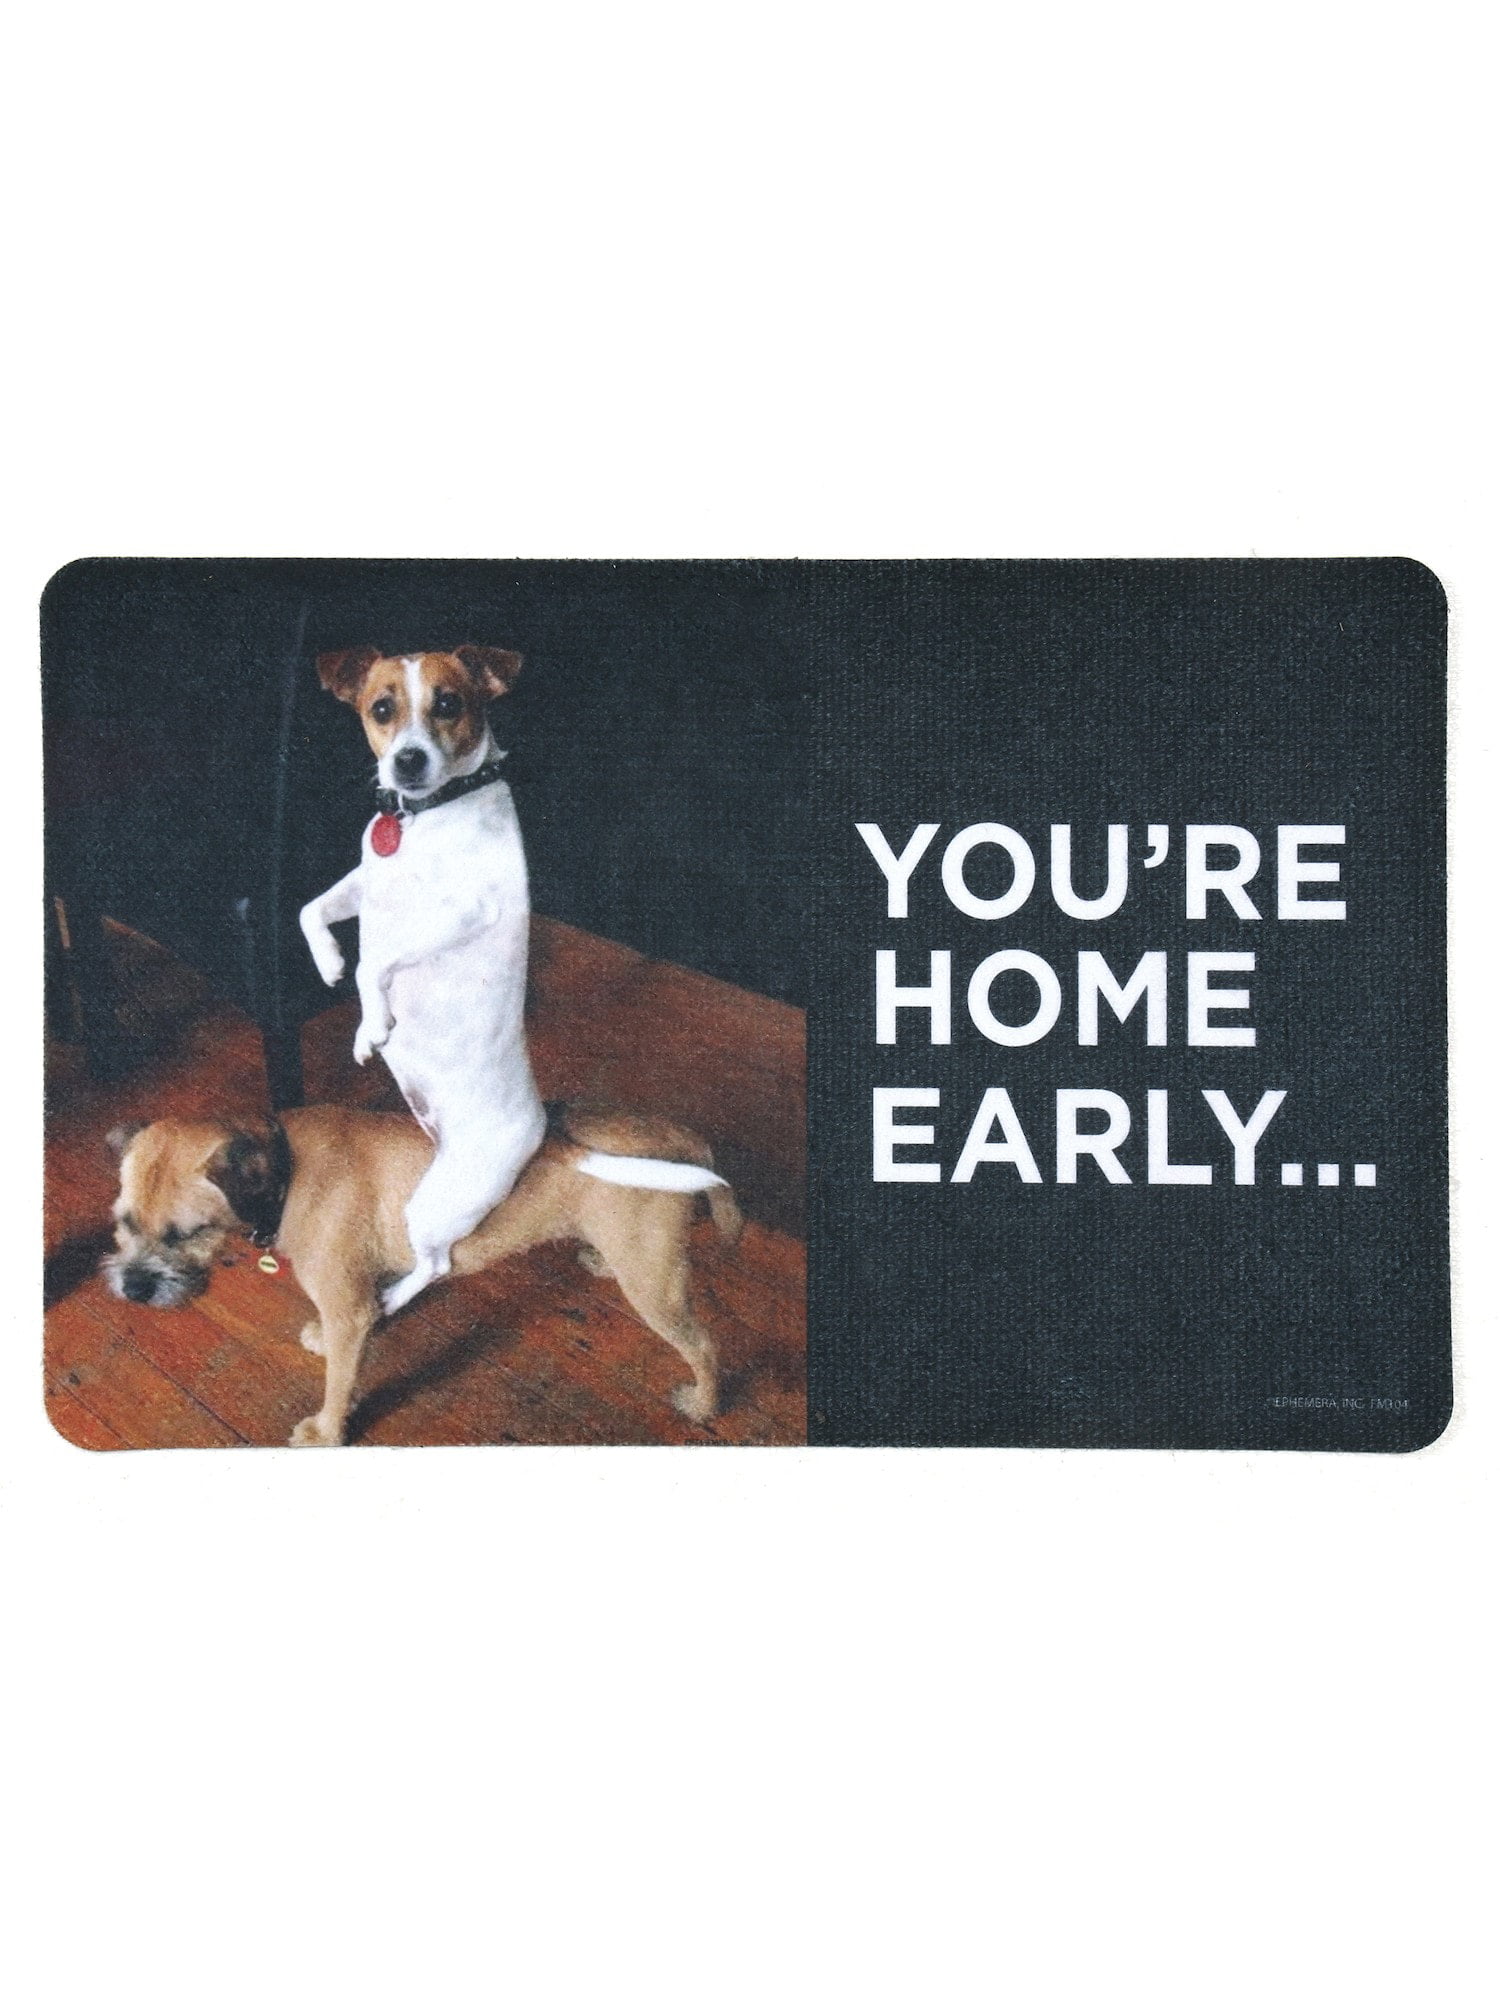 Funny Dog Welcome Mat 27" x 17" High Cotton You're Home Early Doormat 